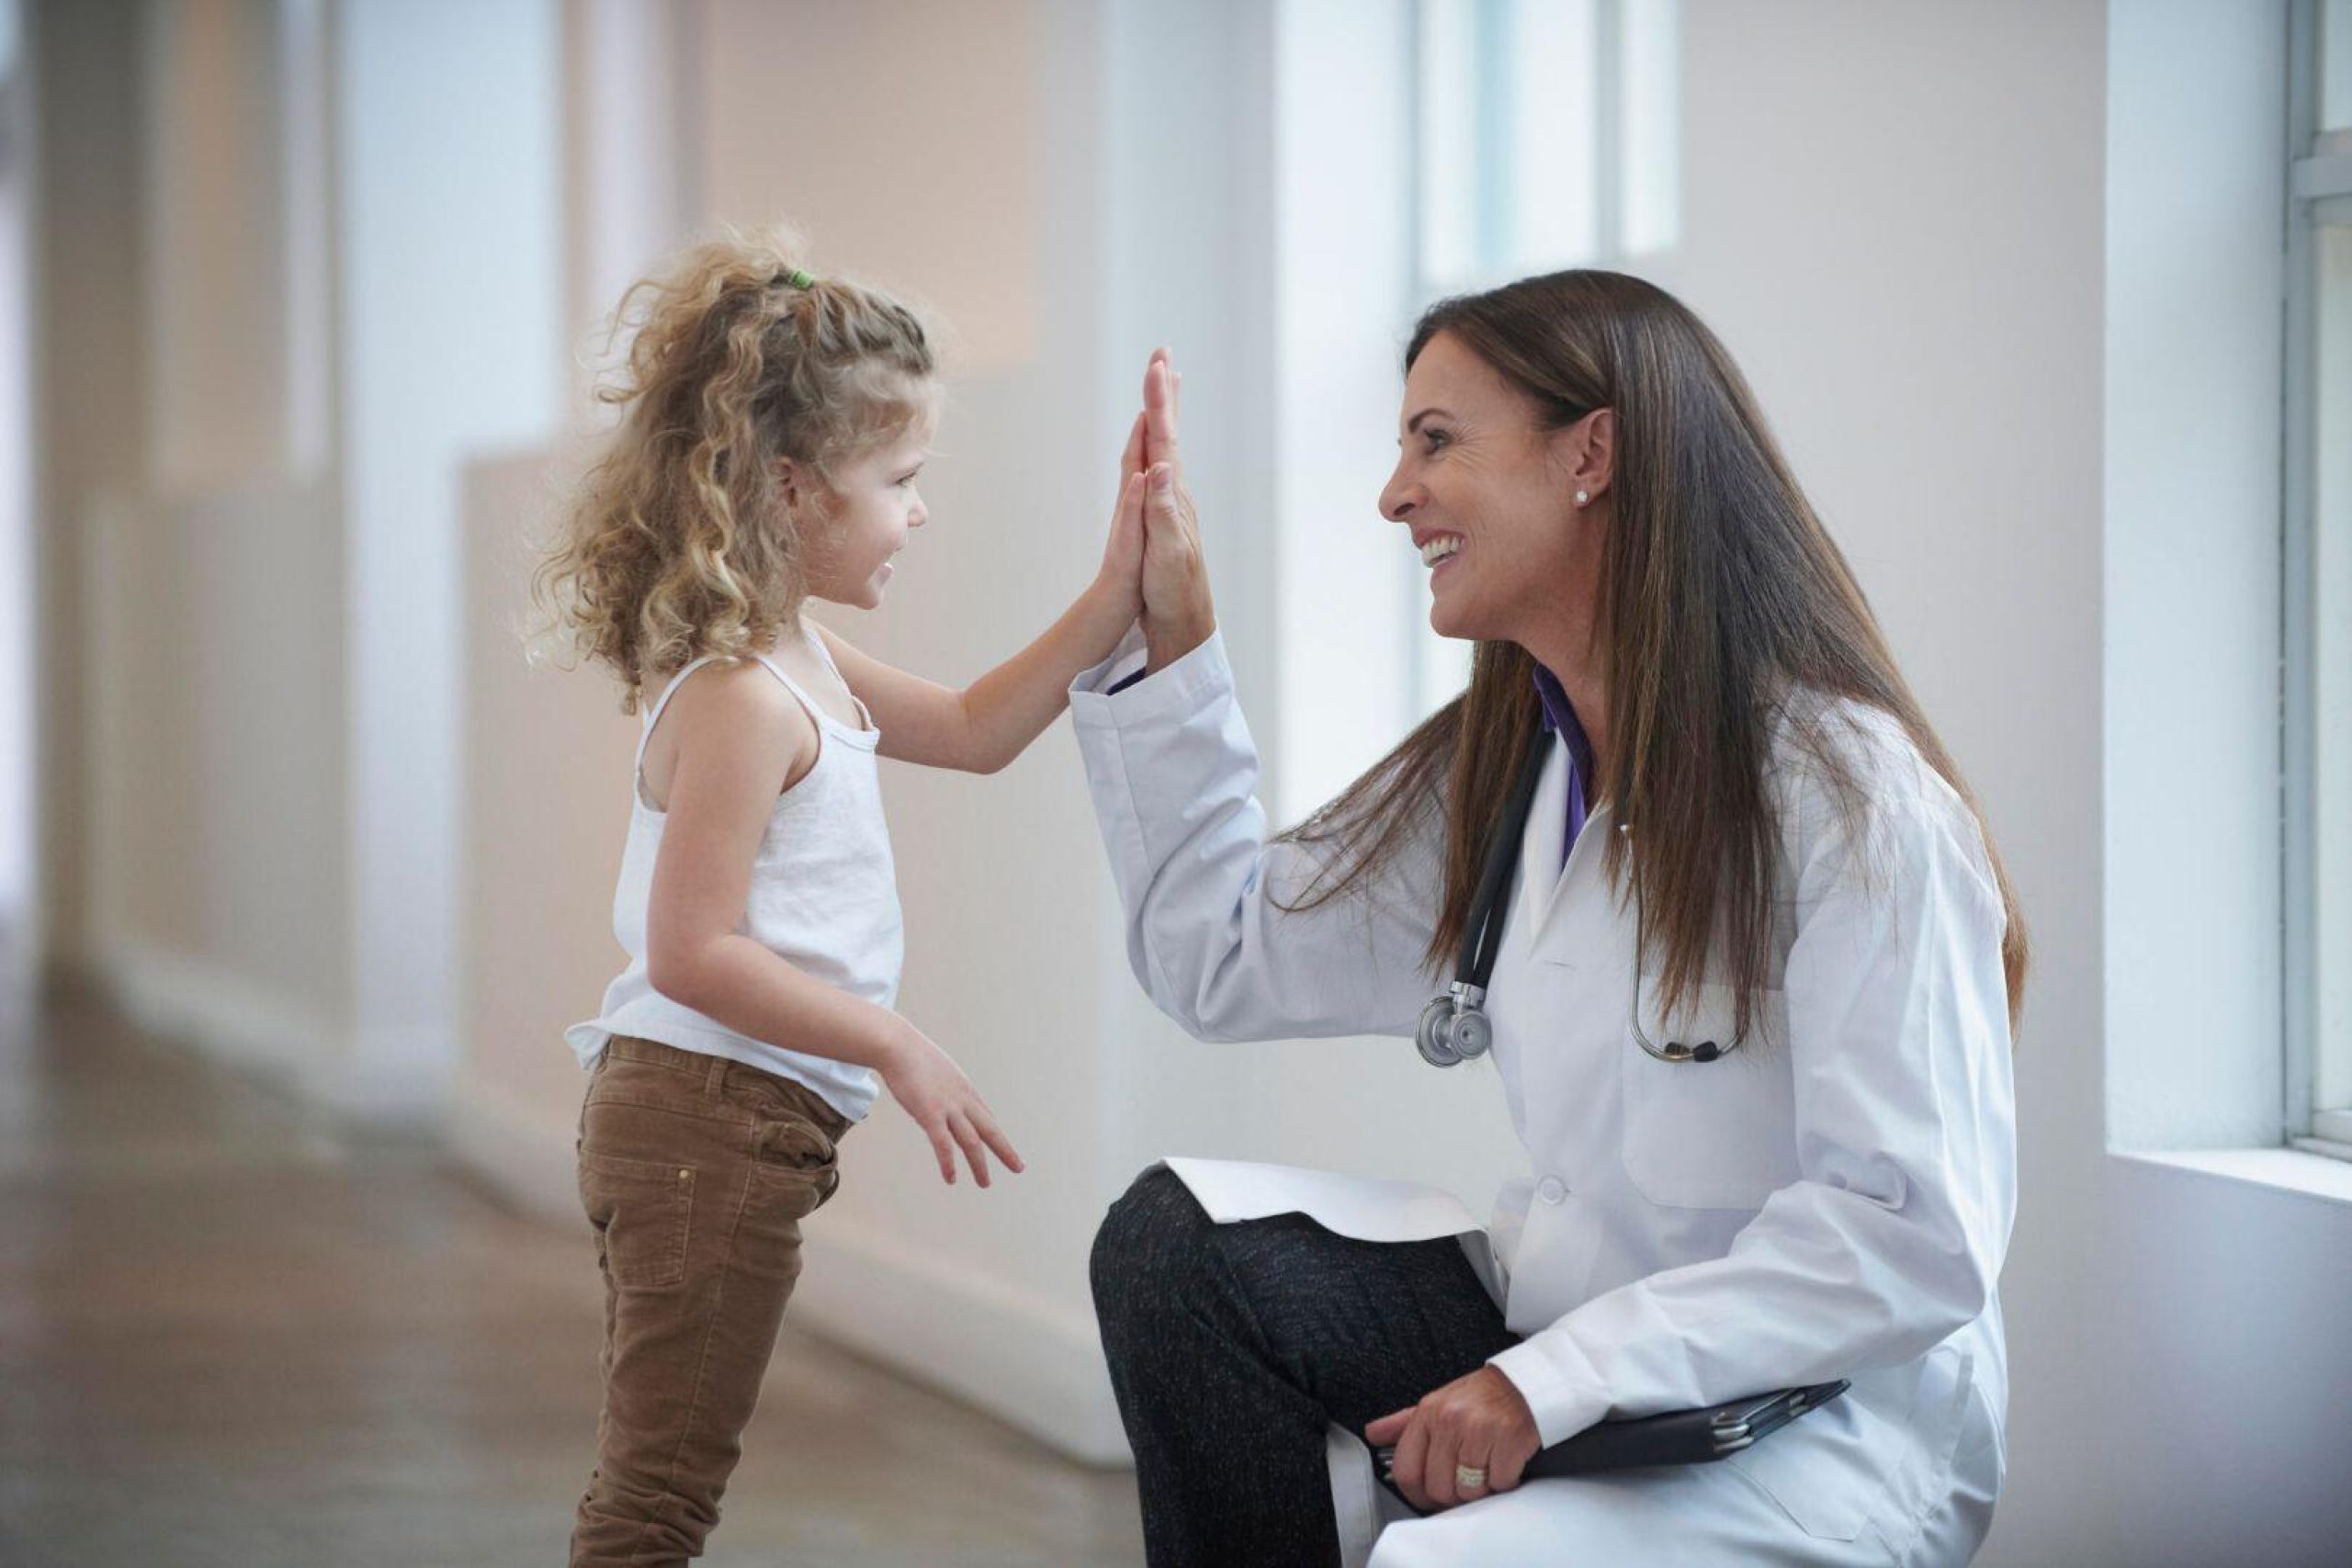 https://www.gettyimages.com/detail/photo/caucasian-doctor-and-girl-high-fiving-in-hallway-royalty-free-image/565977085?phrase=kids+care&adppopup=true